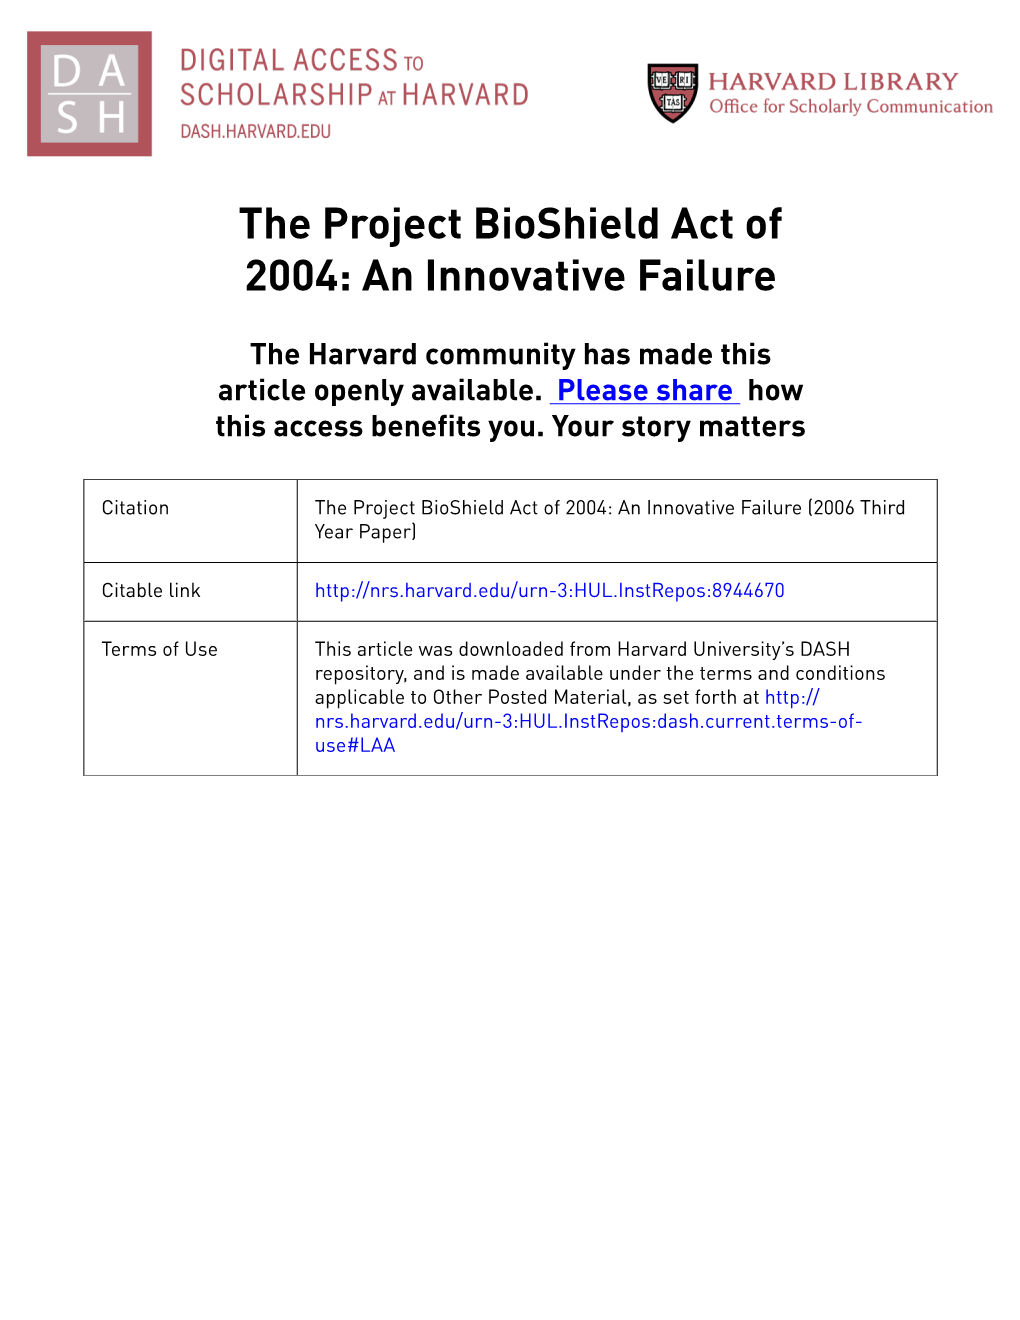 The Project Bioshield Act of 2004: an Innovative Failure